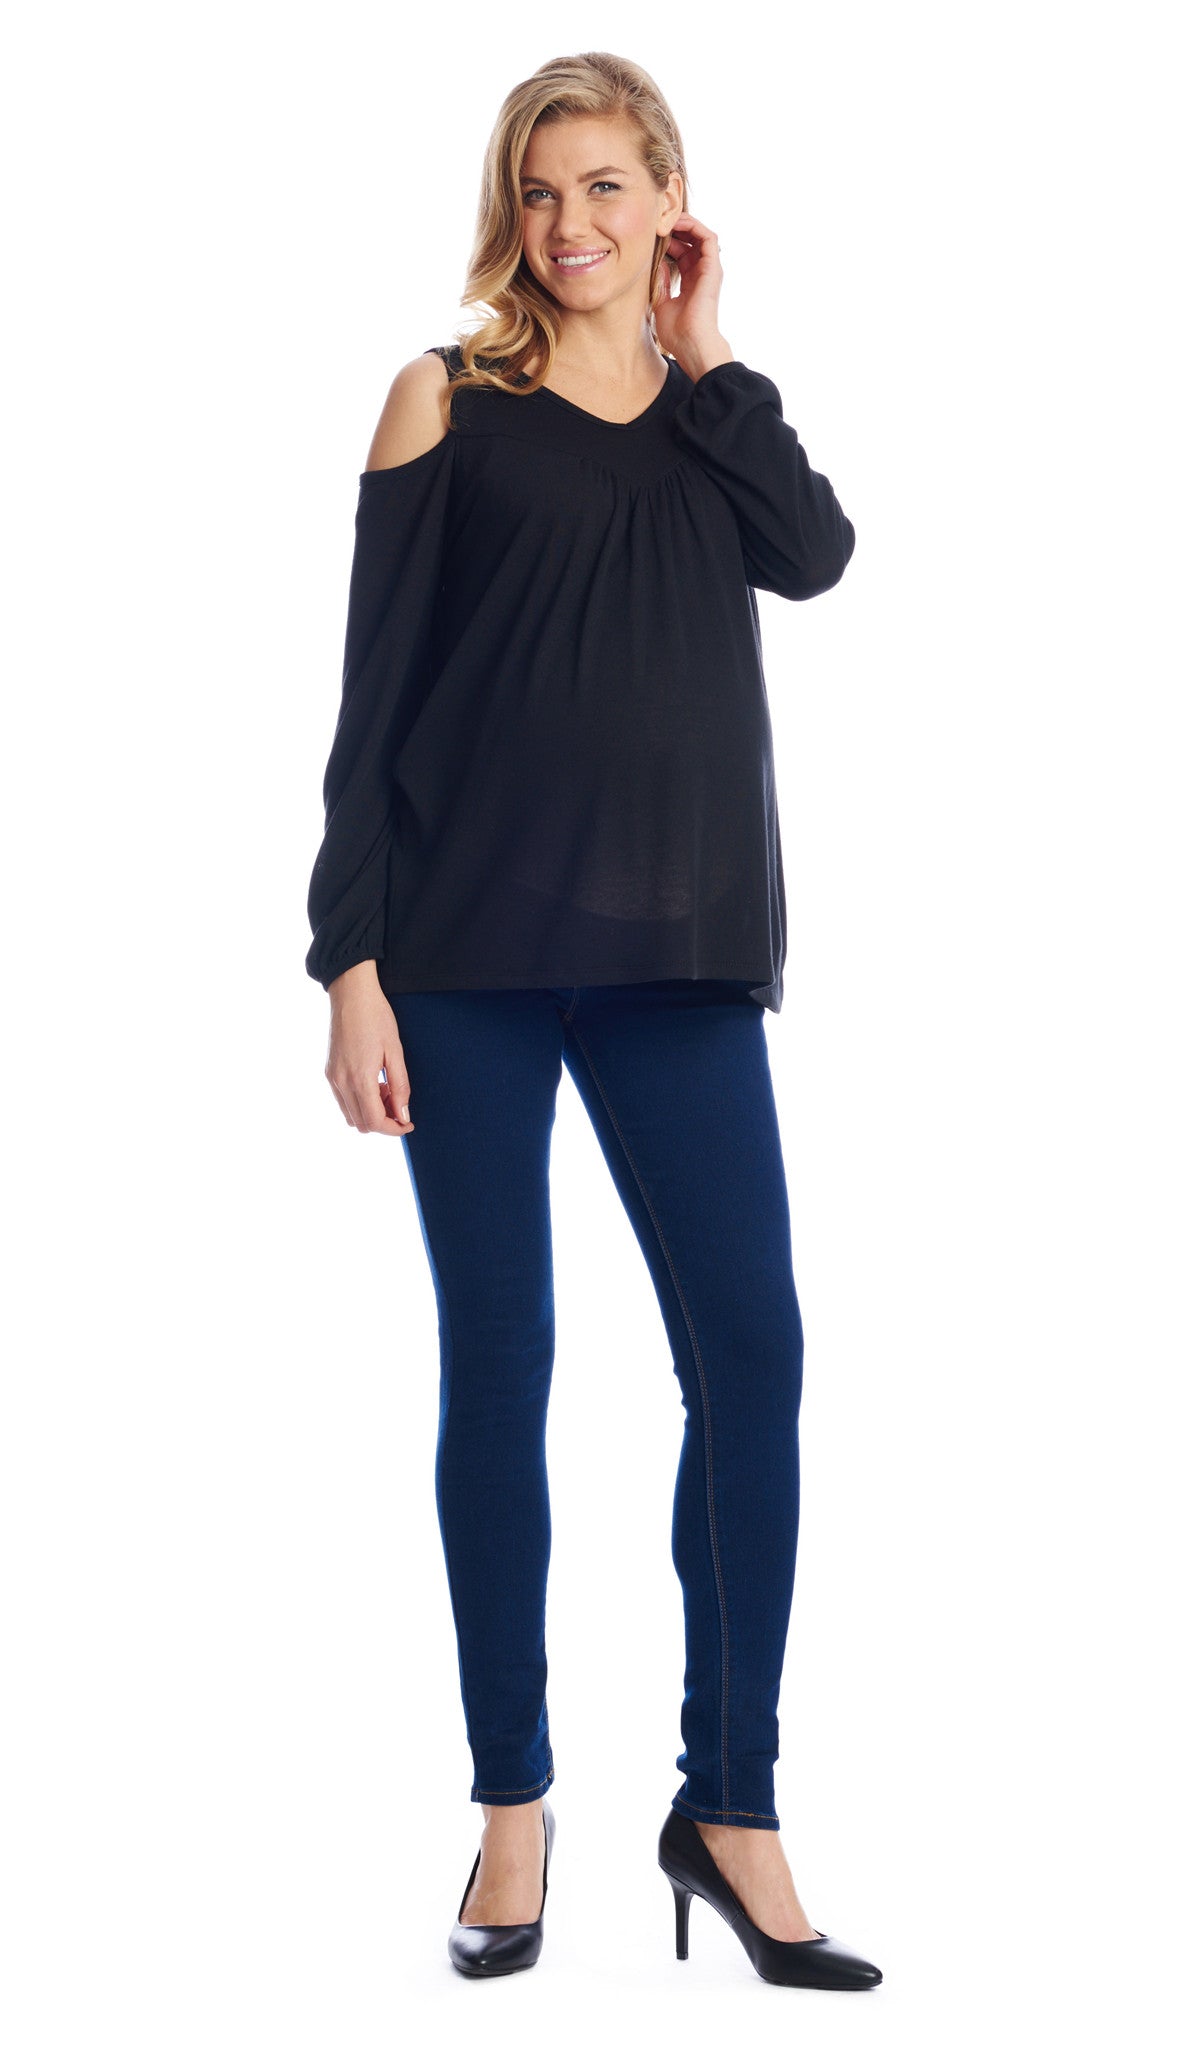 Black Nora full length shot of top worn by pregnant woman.